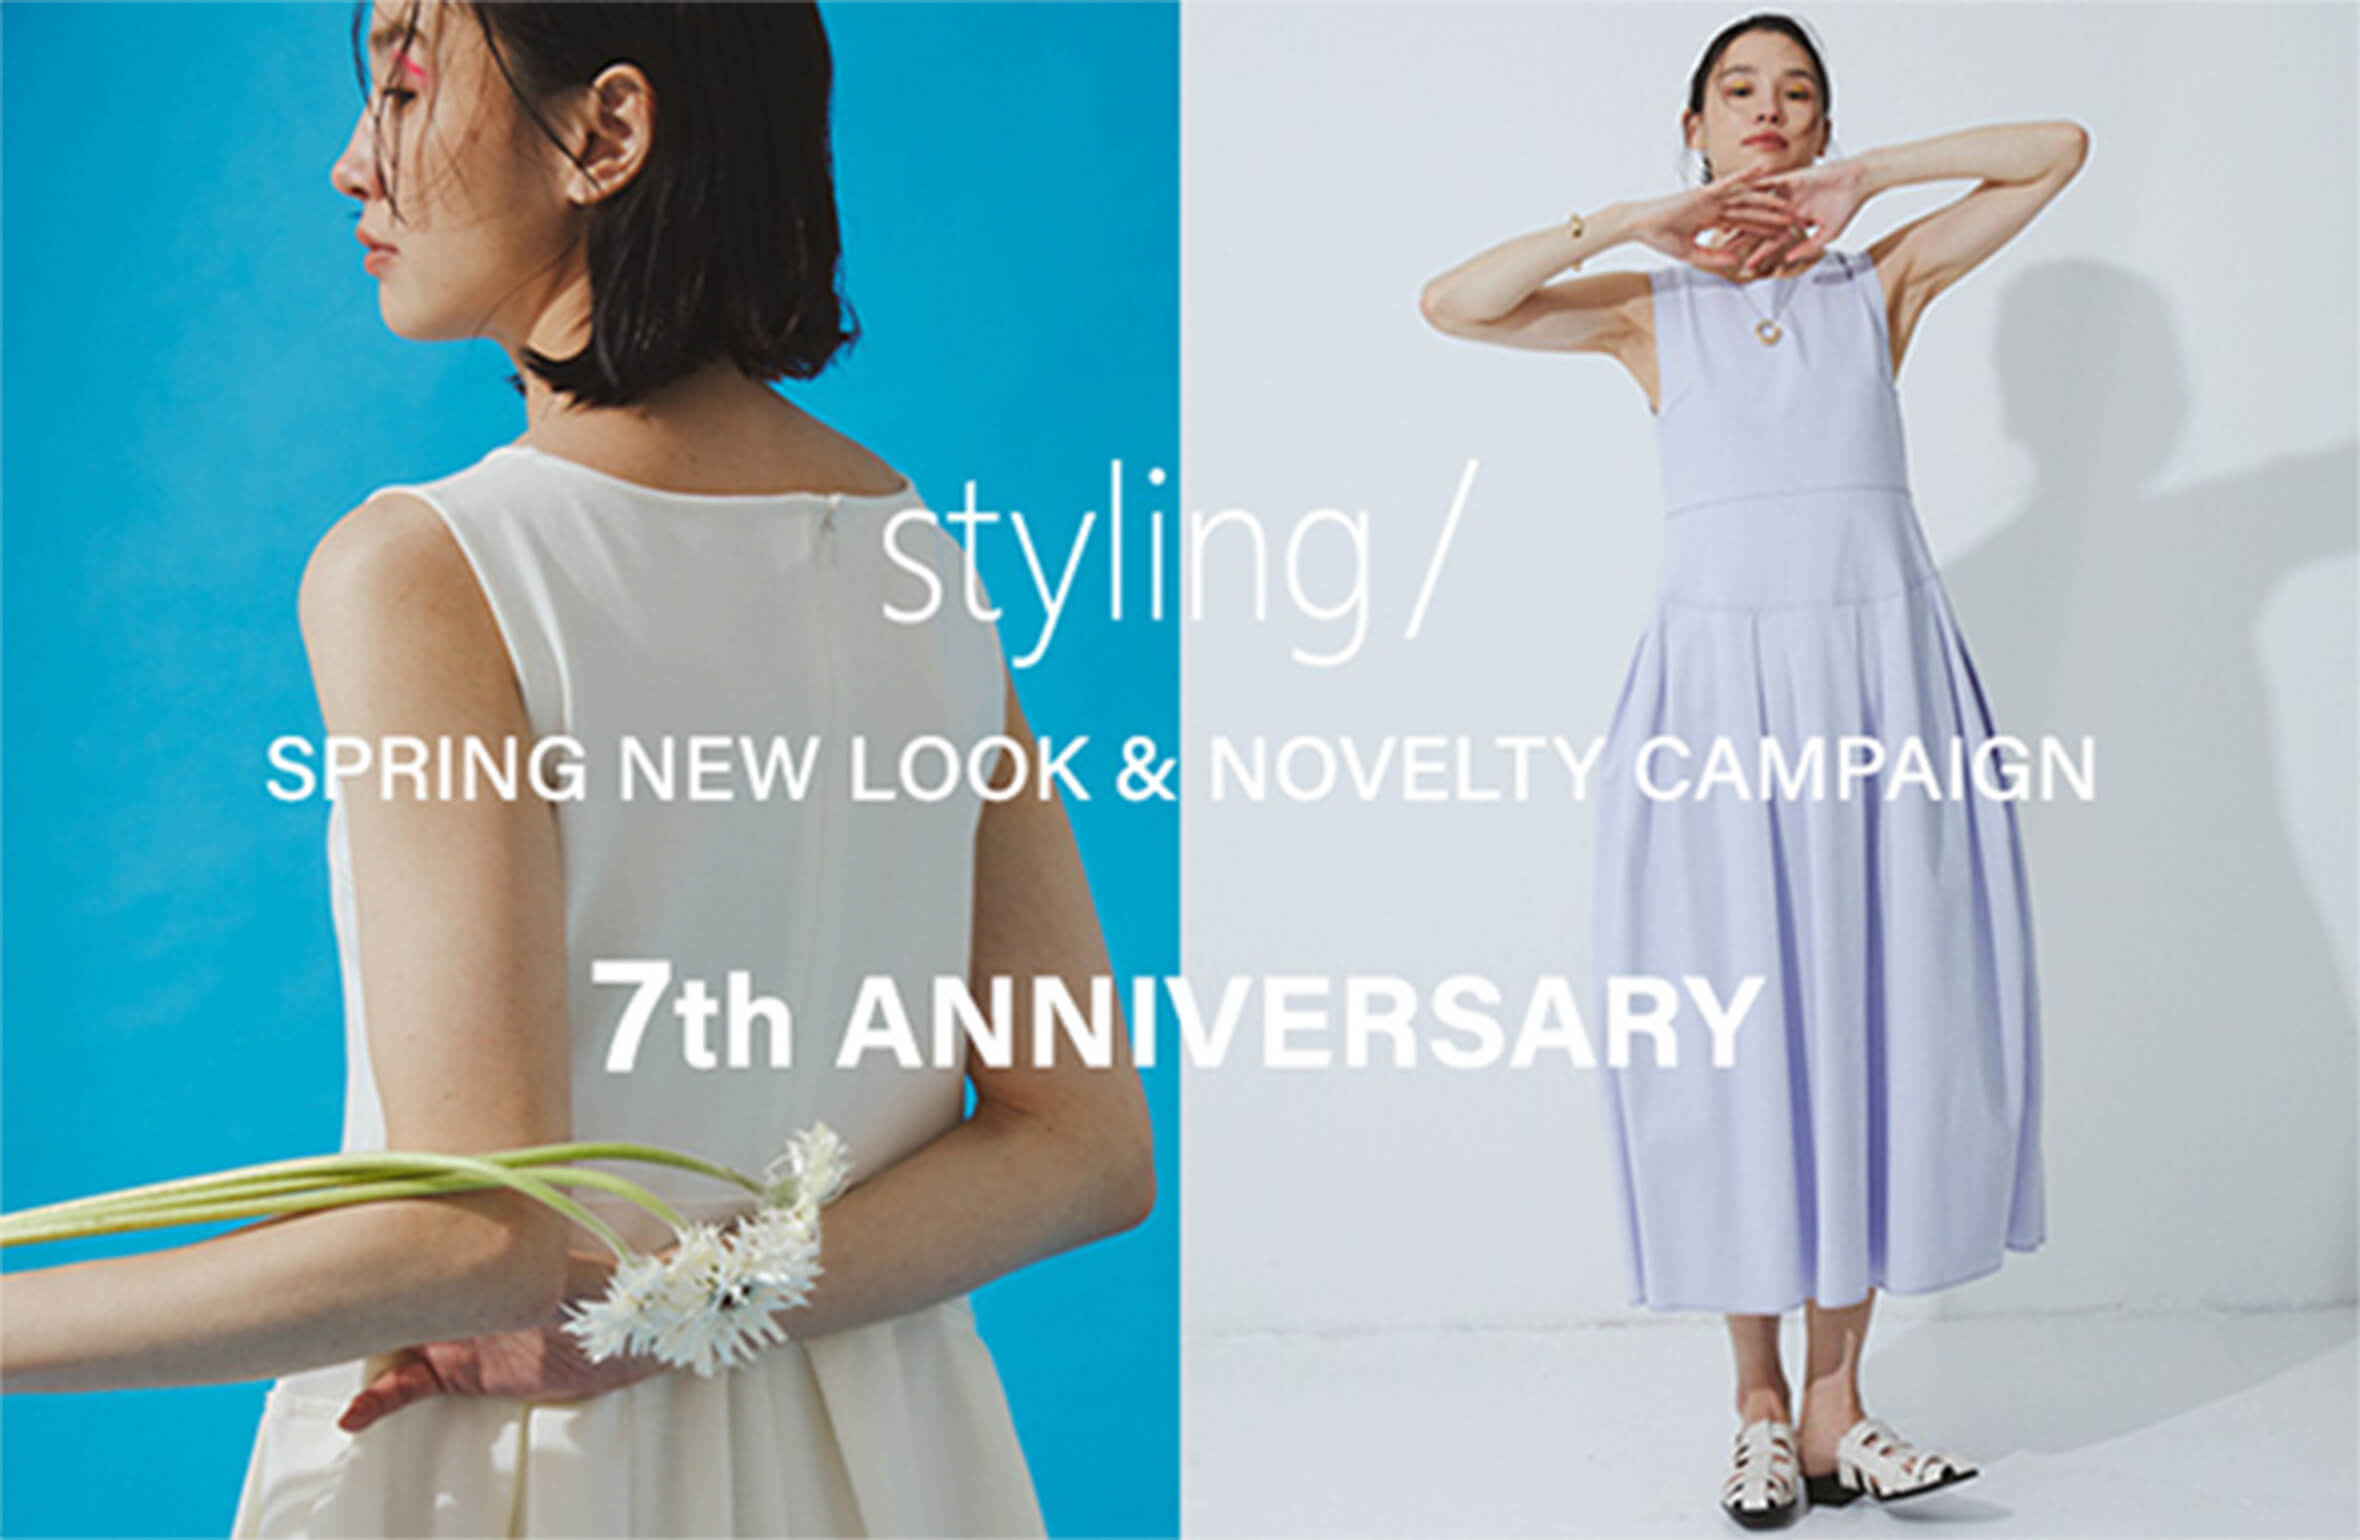 styling/ SPRING NEW LOOK & NOVELTY CAMPAIGN 7th ANNIVERSARY